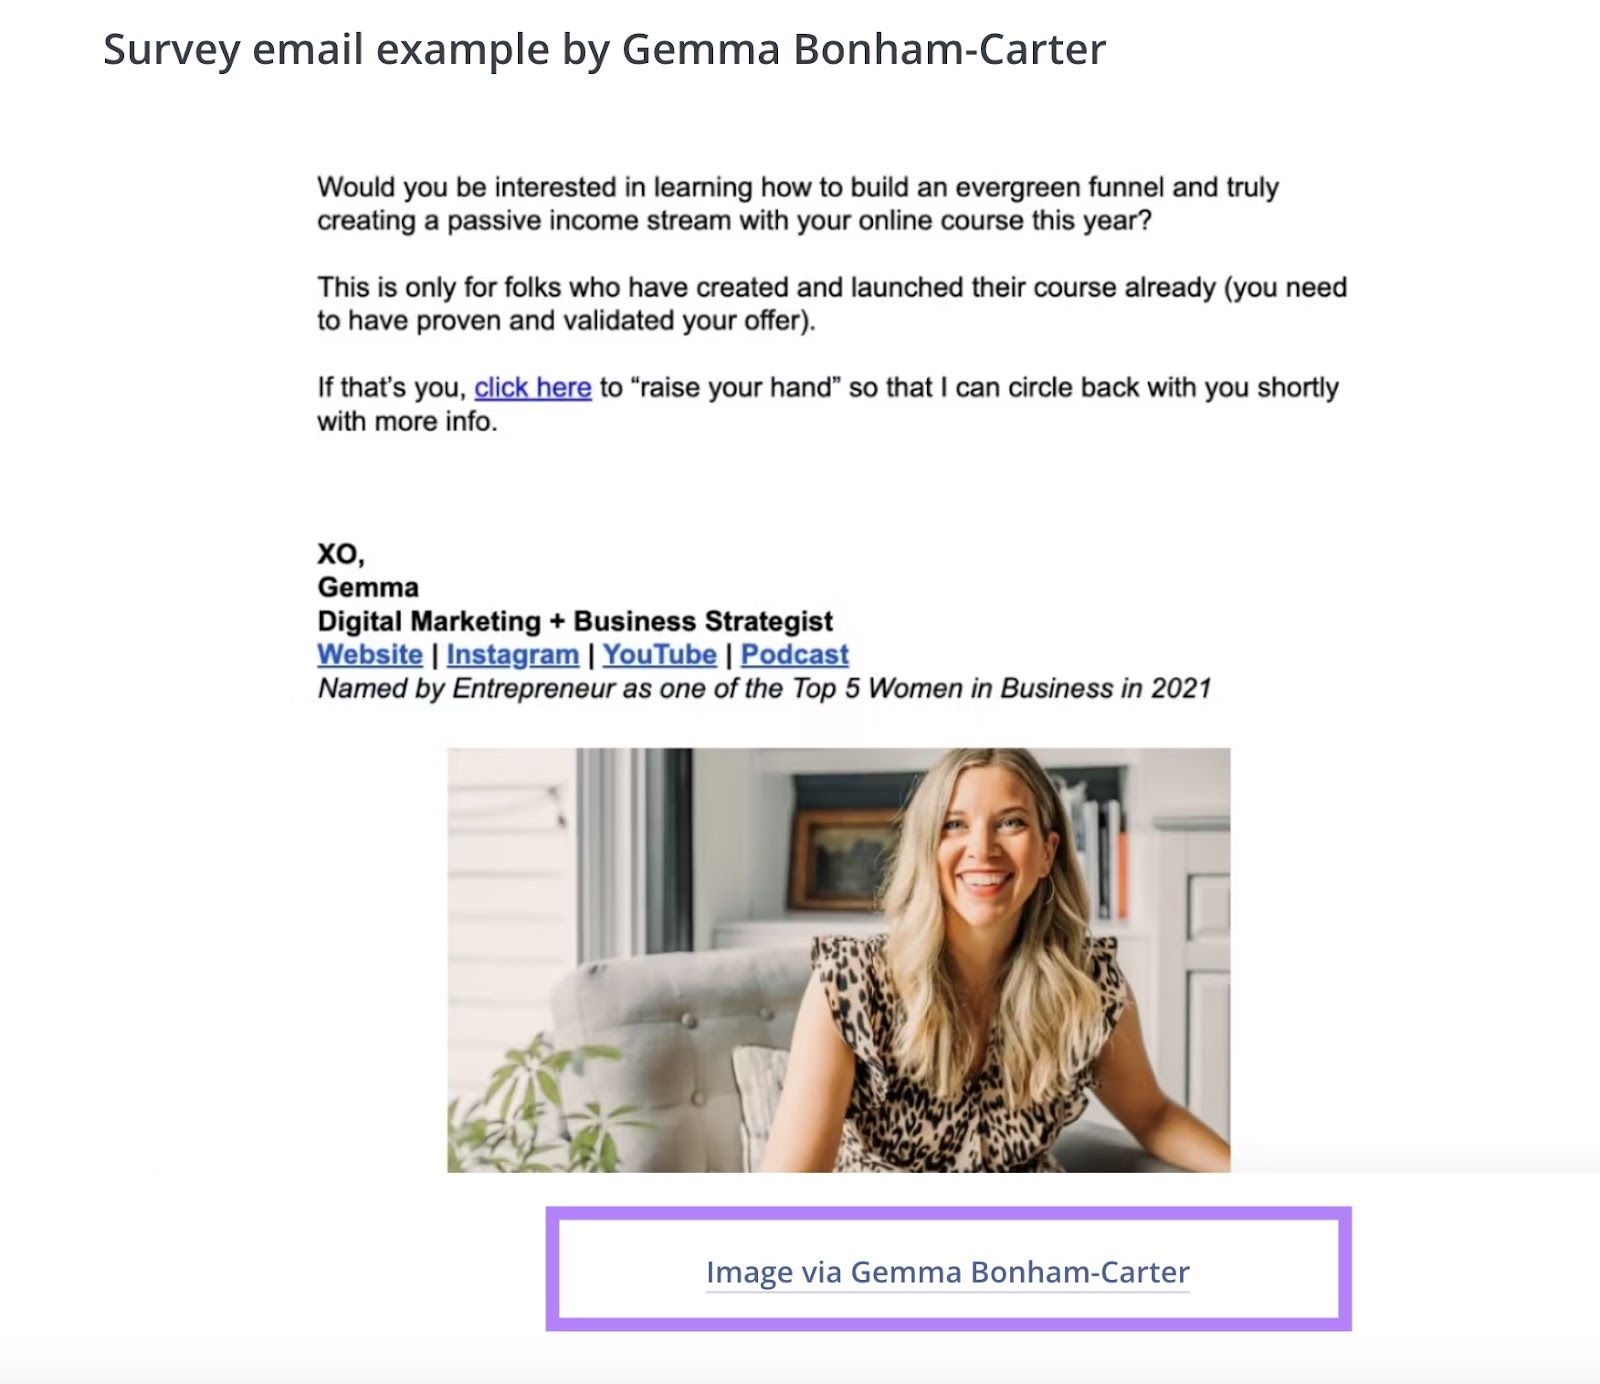 ConvertKit's survey email example email